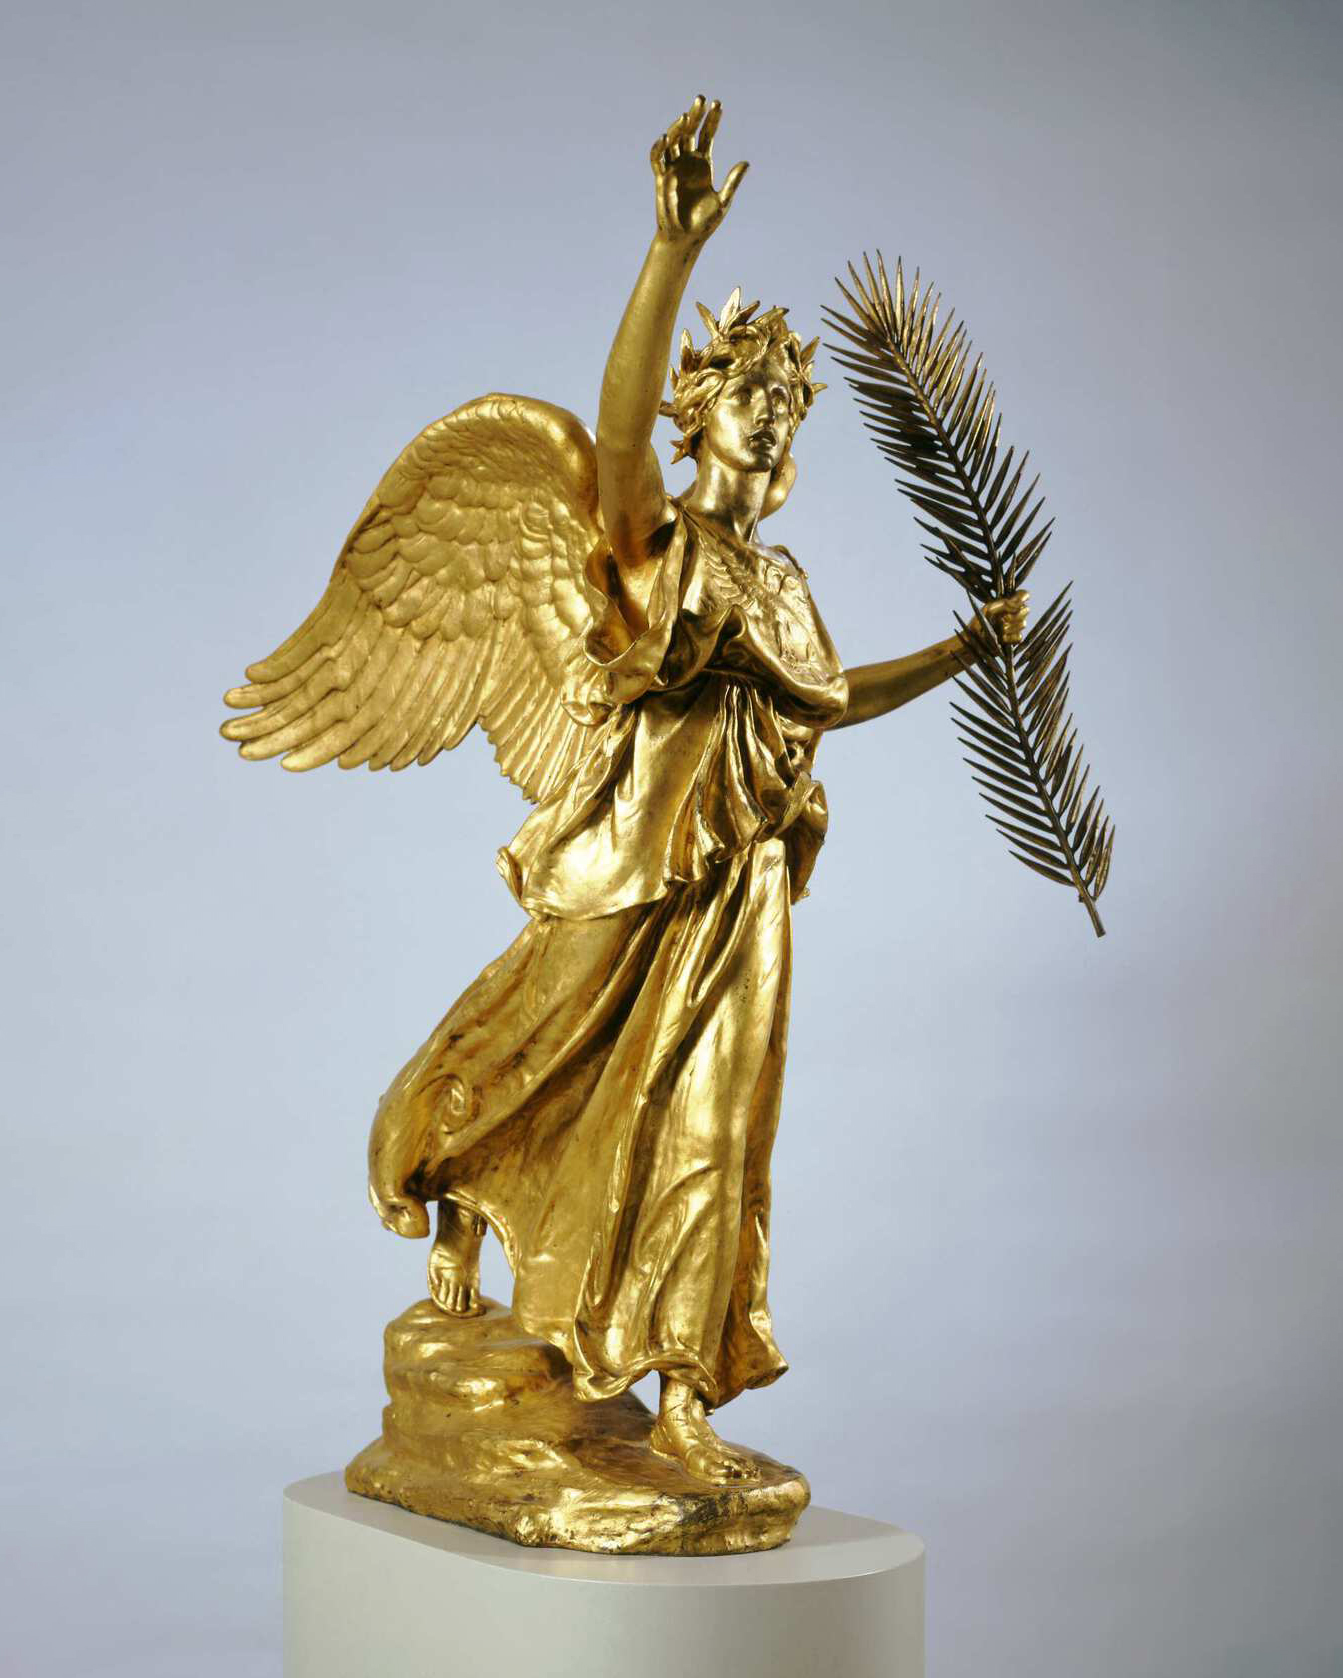 A bronze sculpture of an angel holding a palm frond in its left hand and raising its right towards the sky.